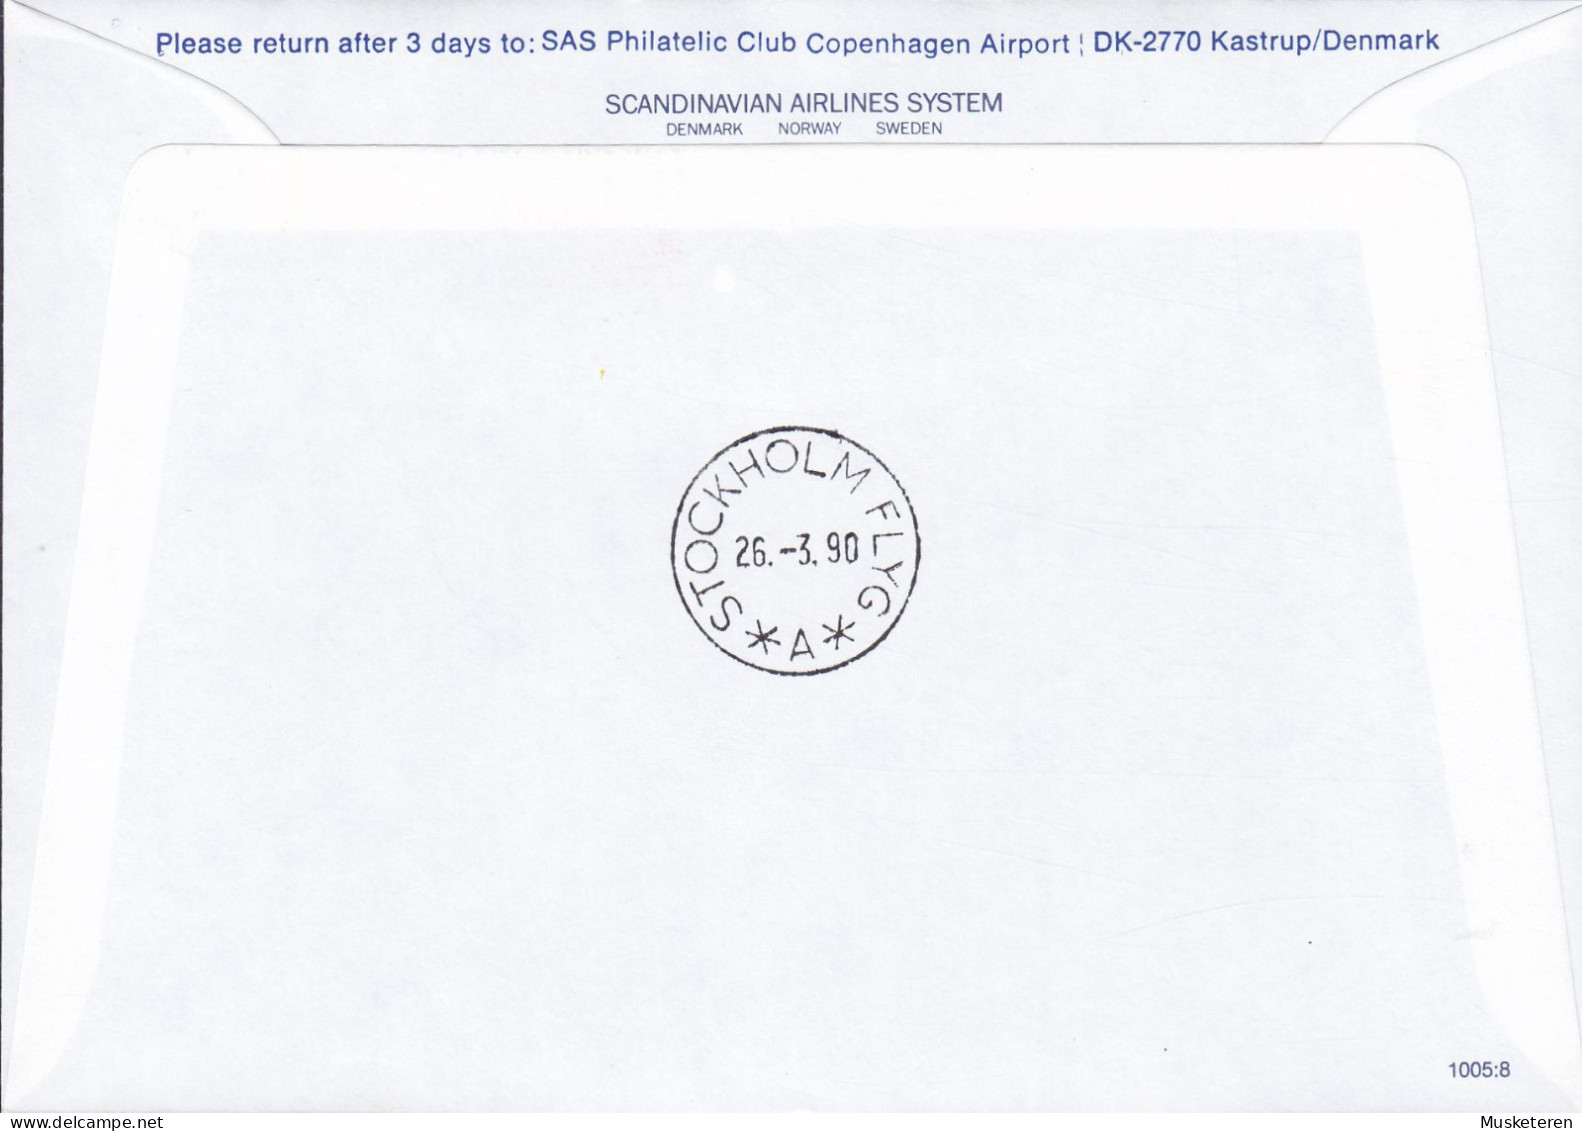 Finland SAS First DC-9 Flight TAMPERE-STOCKHOLM, TAMPERE 1990 Cover Brief Lettre Europa CEPT Stamp - Covers & Documents